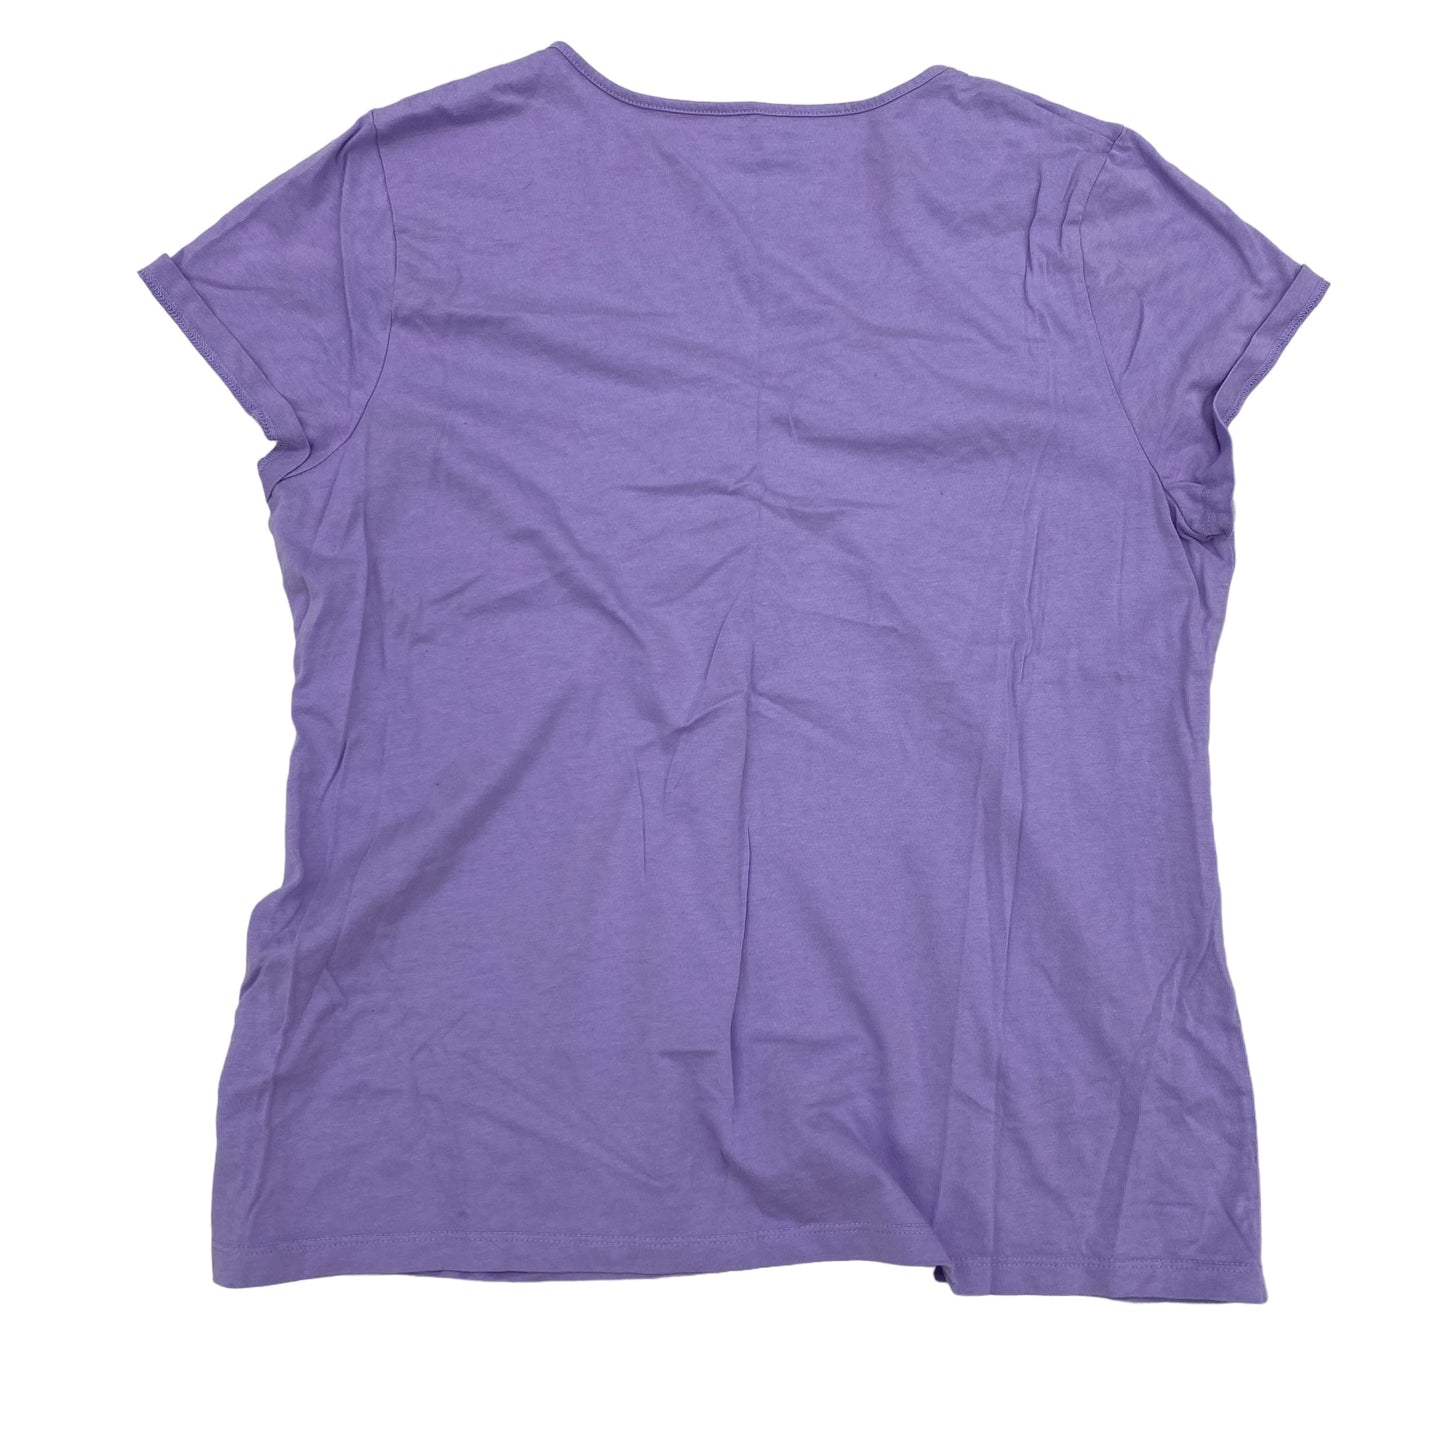 PURPLE TOP SS by CROFT AND BARROW Size:XL